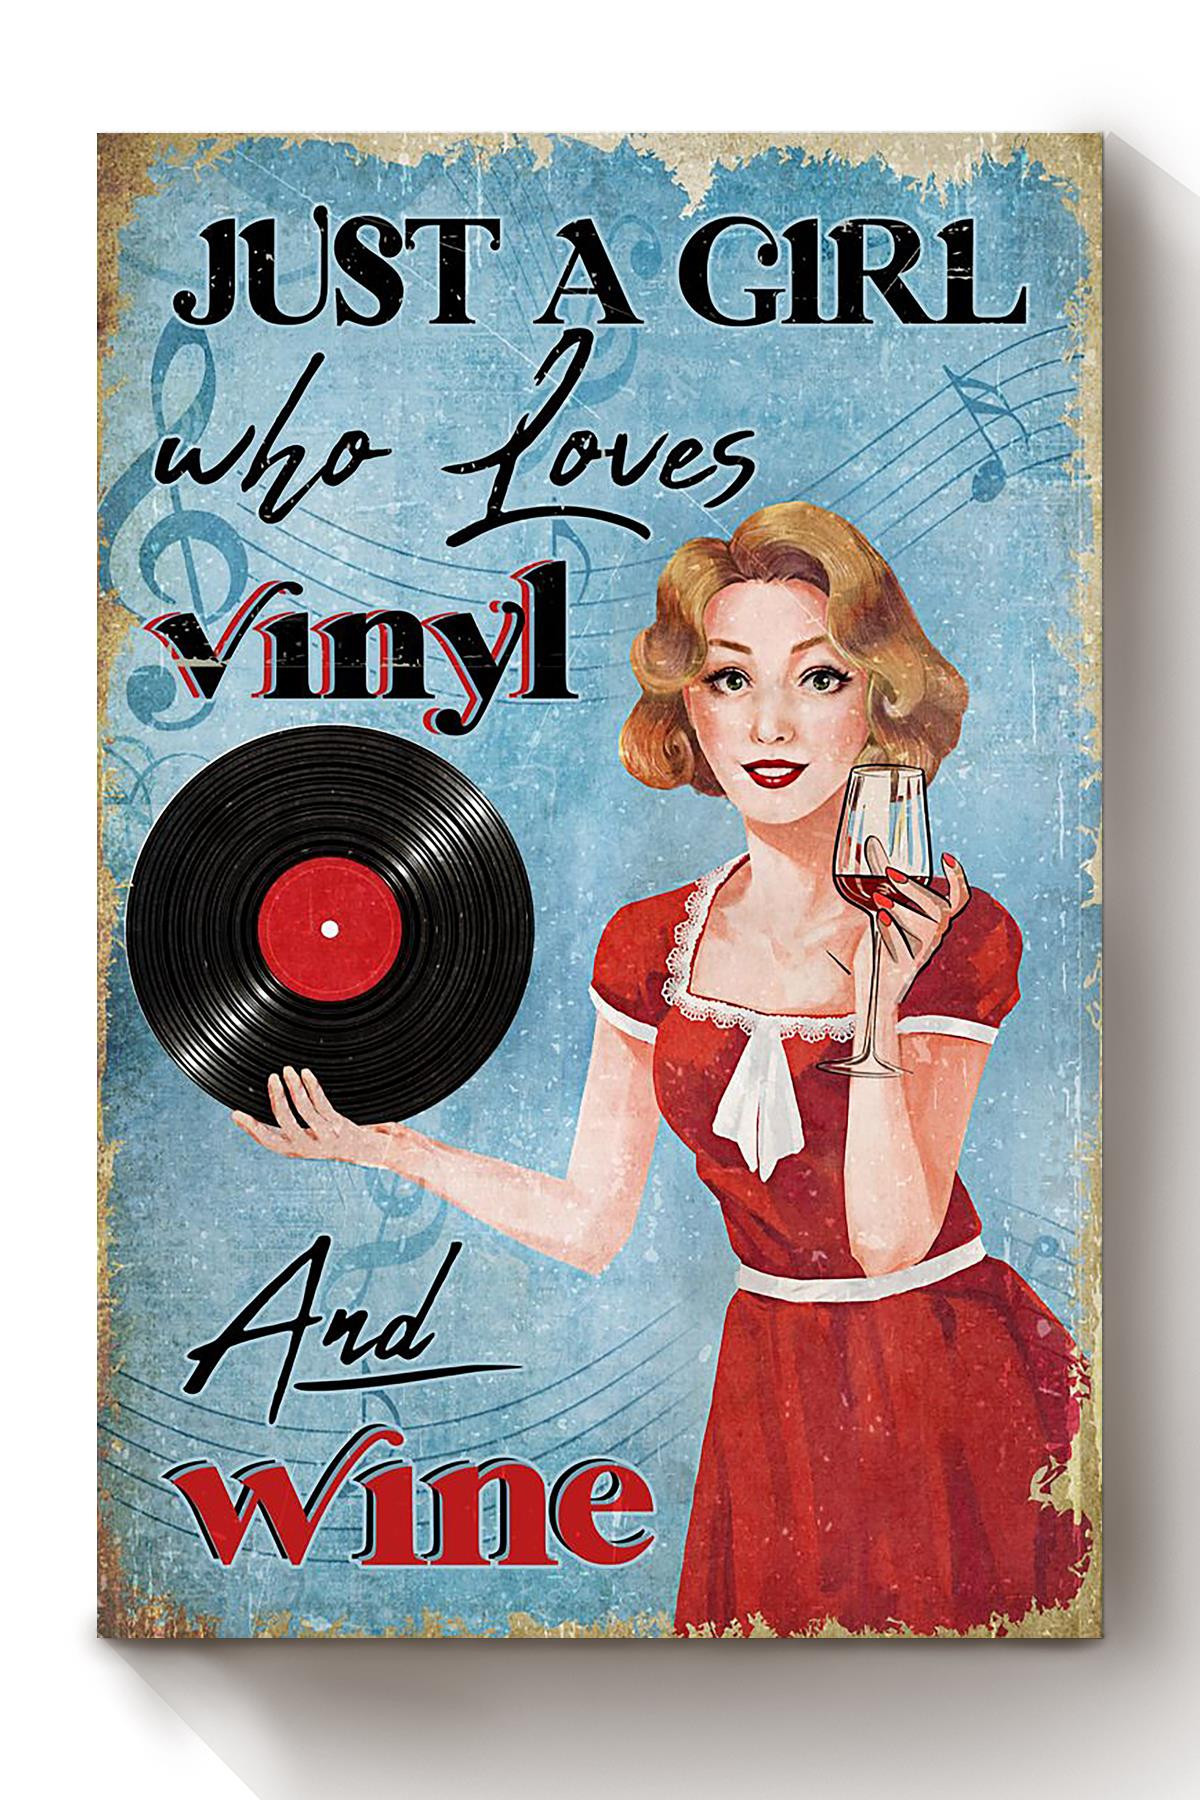 Just A Girl Loves Vinyl And Wine Gift For Vinyl Music Lover Record Collector Canvas Wrapped Canvas 8x10